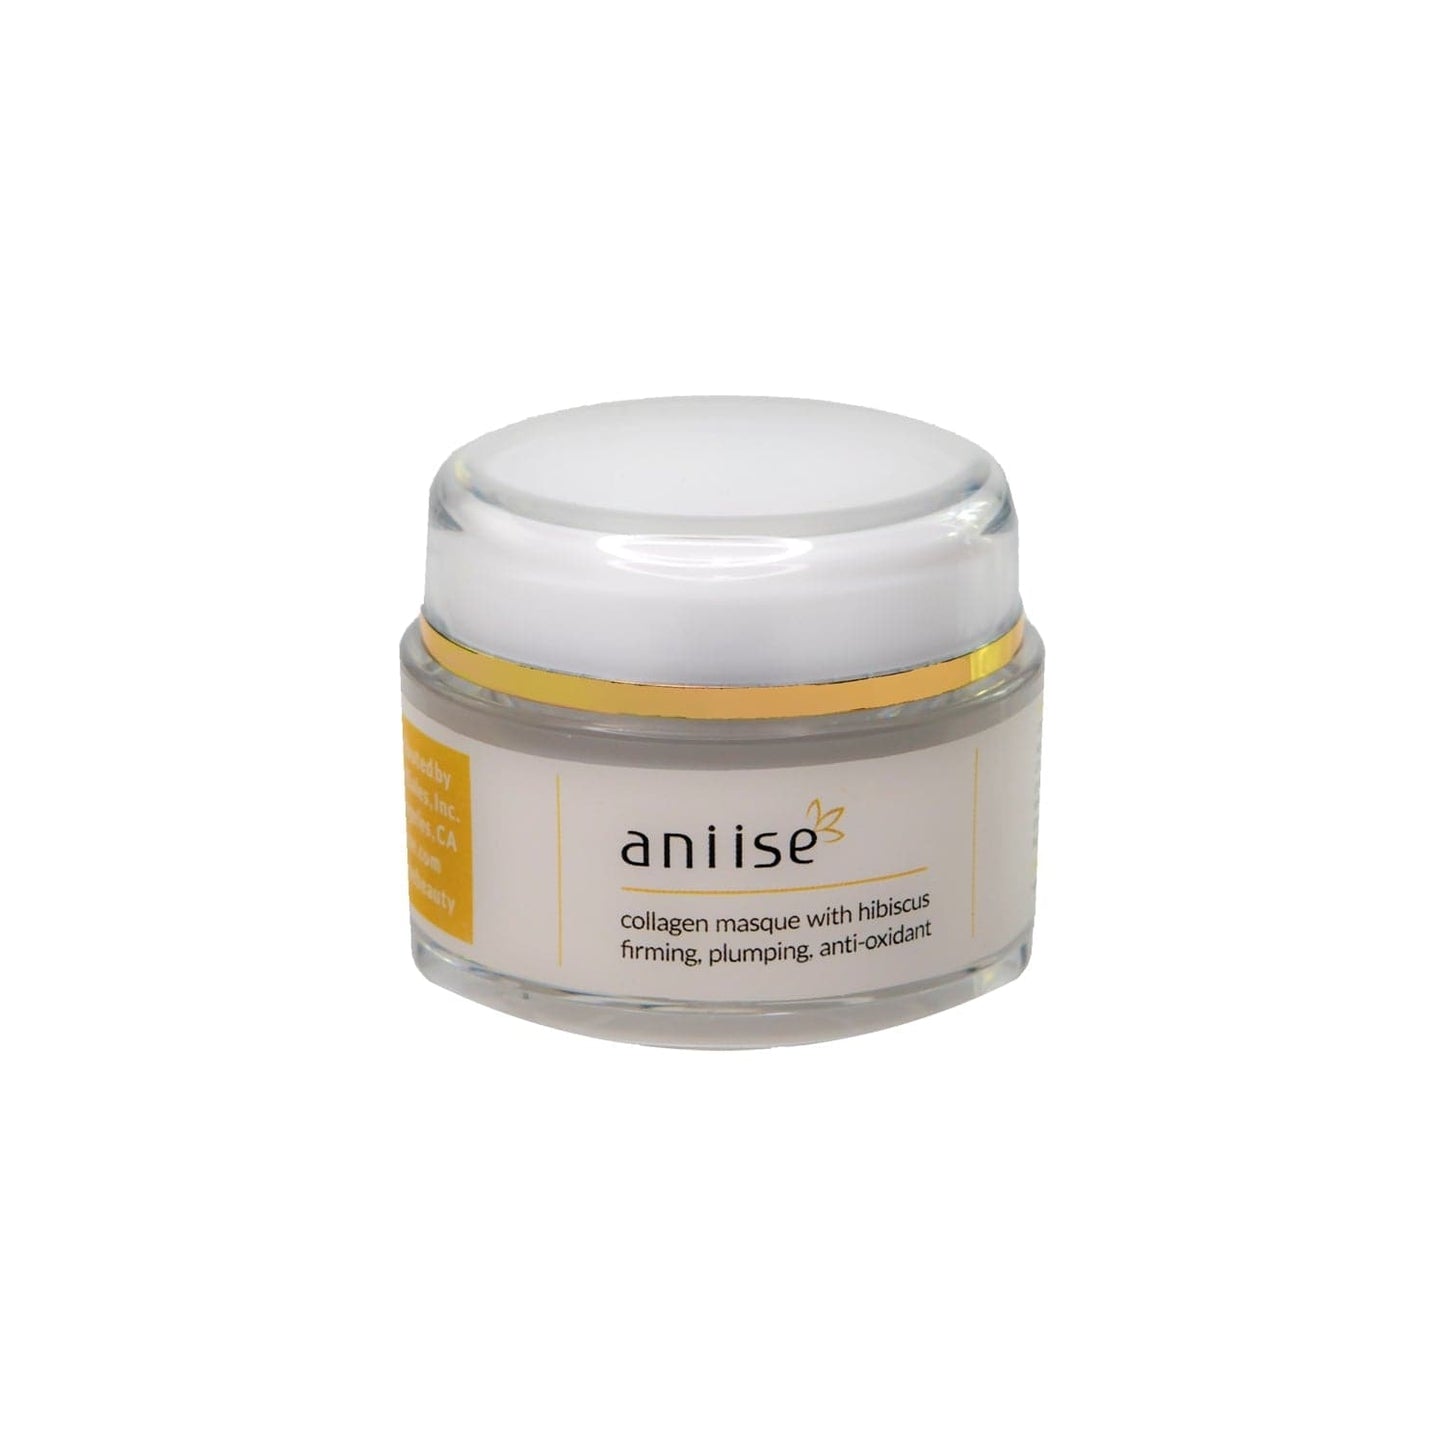 Collagen Facial Mask with Hibiscus by Aniise